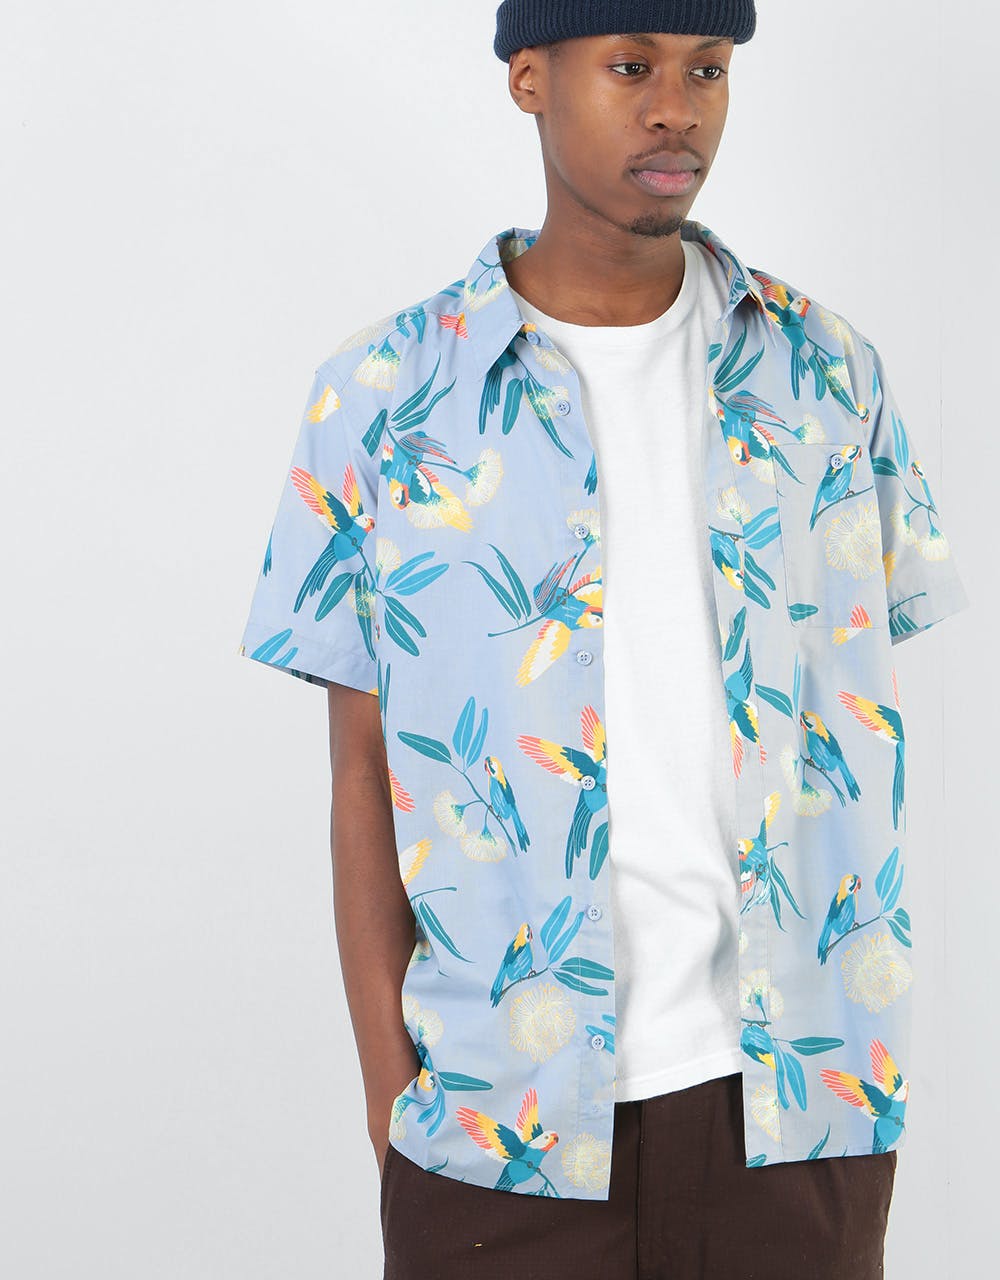 Patagonia Go To S/S Shirt - Parrots: Ghost Purple